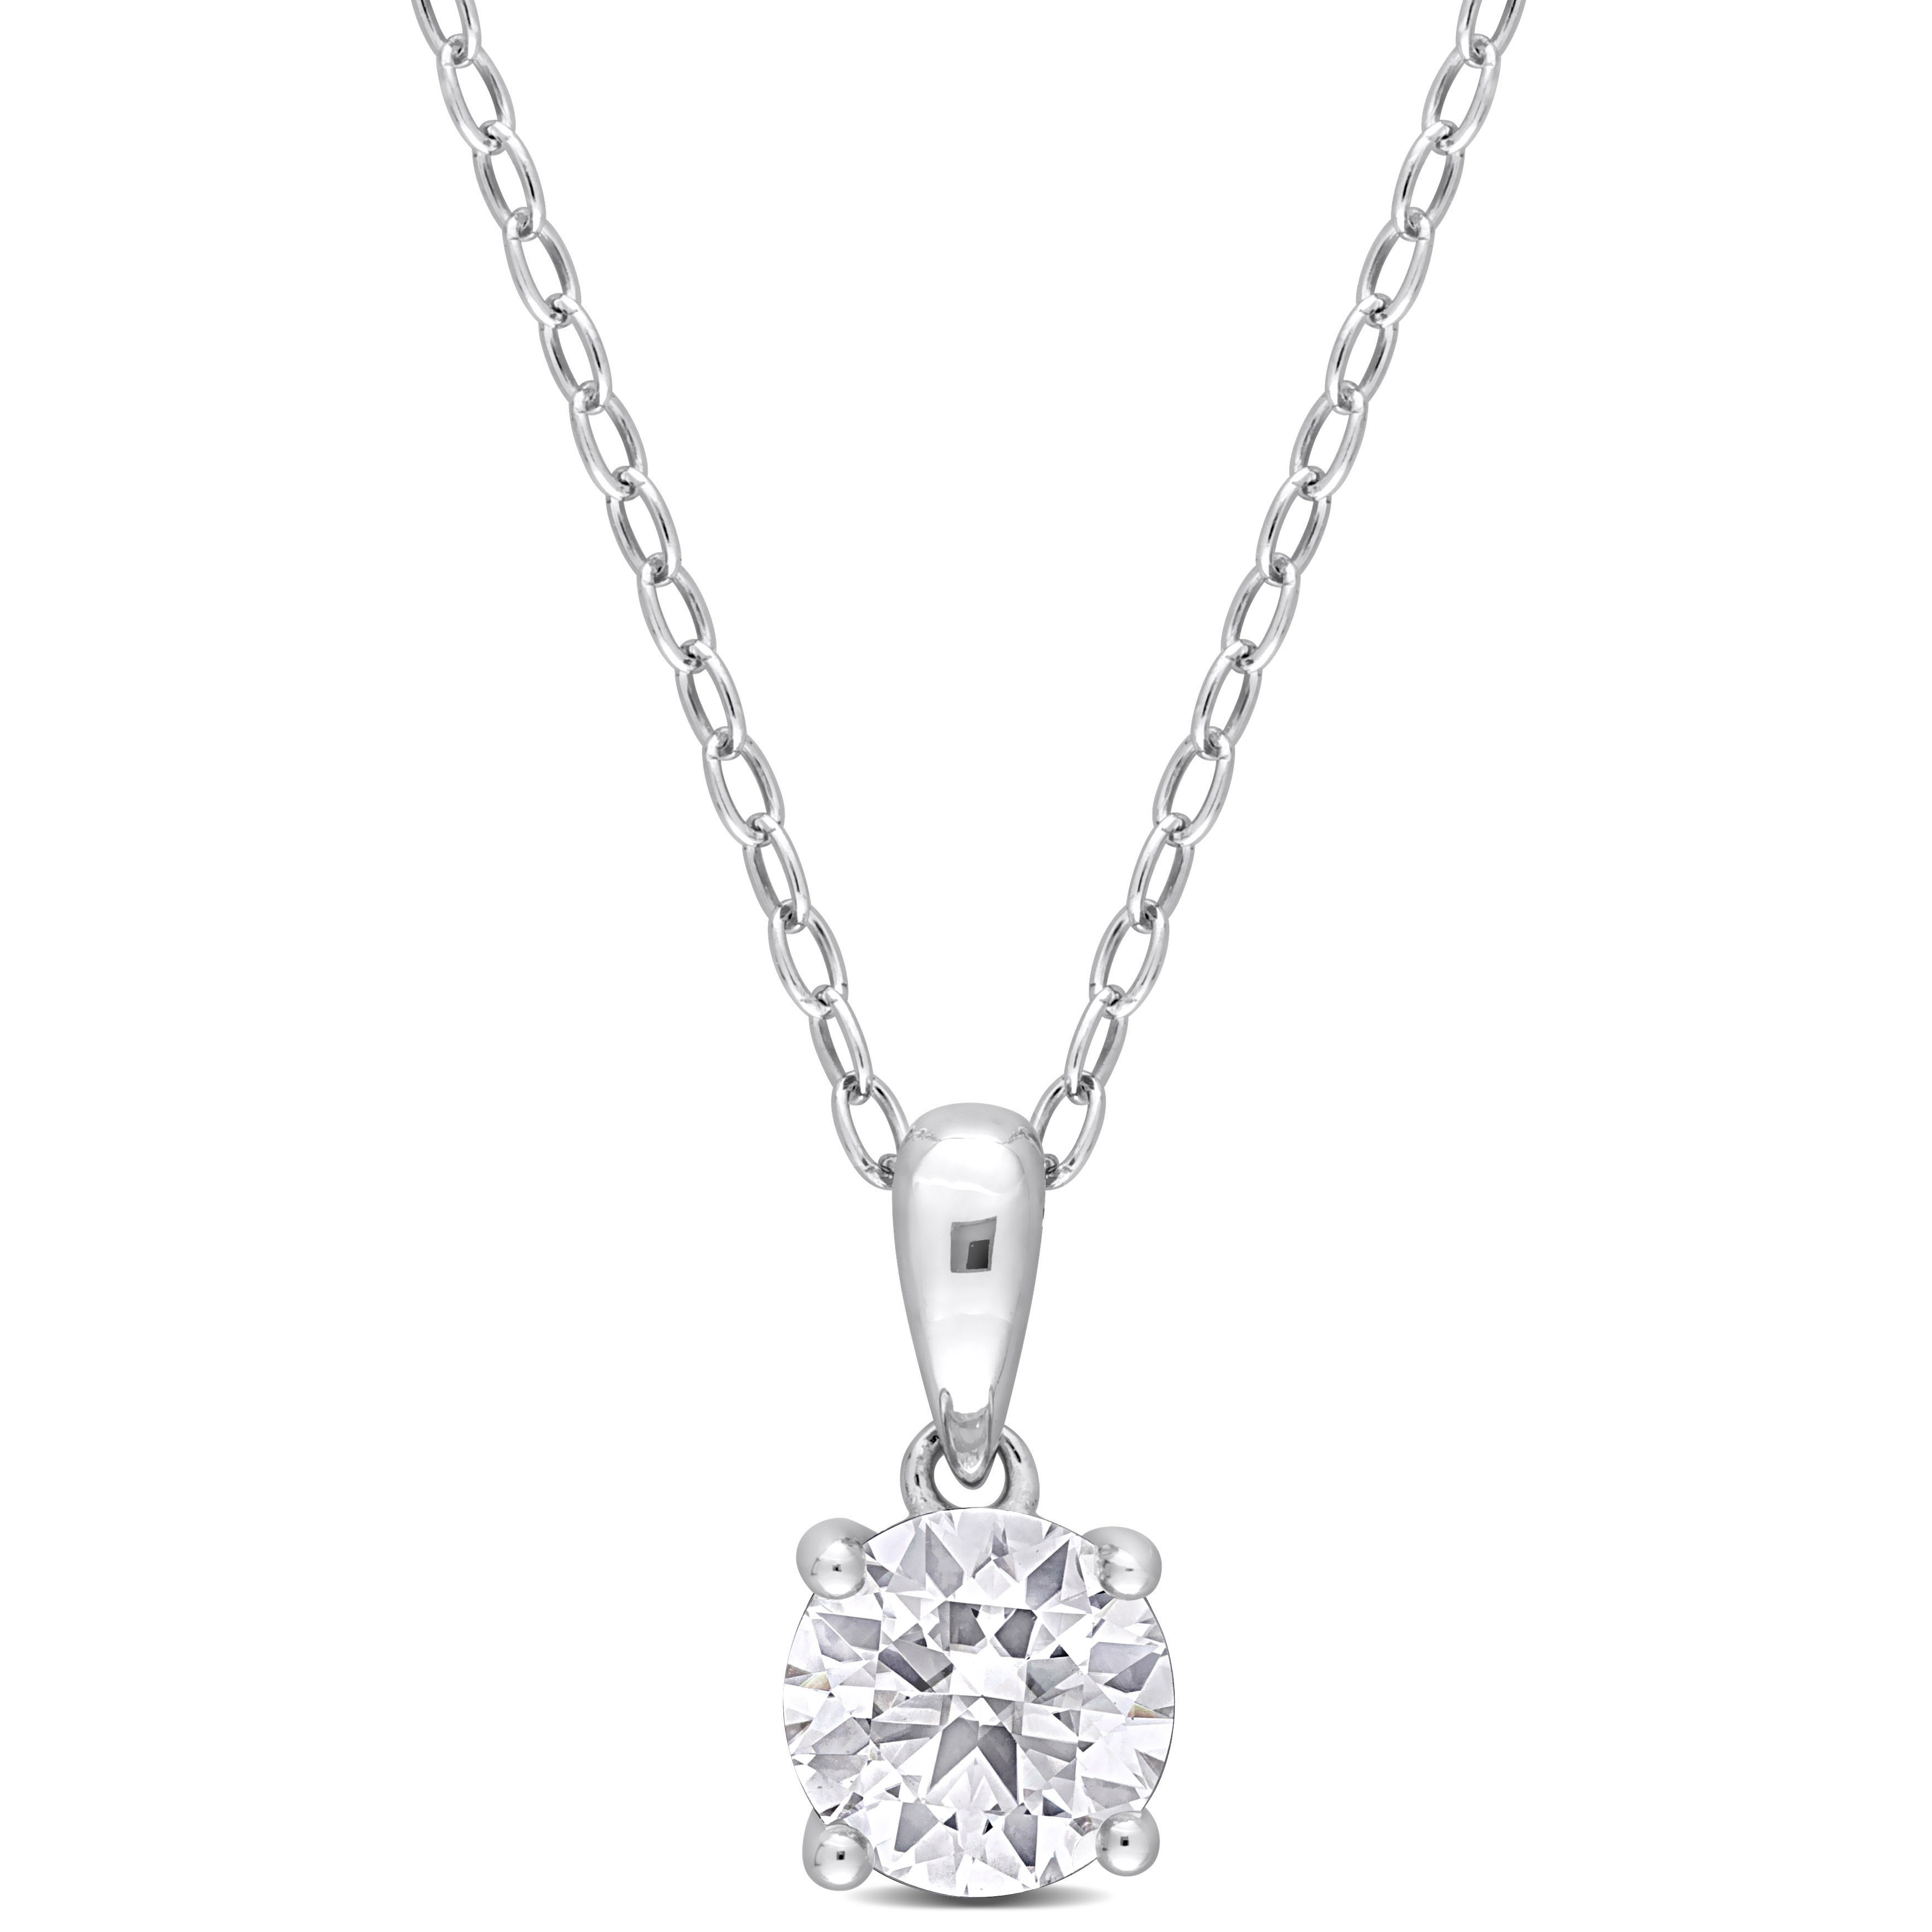 1 CT TGW White Topaz Solitaire Heart Design Pendant with Chain in Sterling Silver - 18 in.